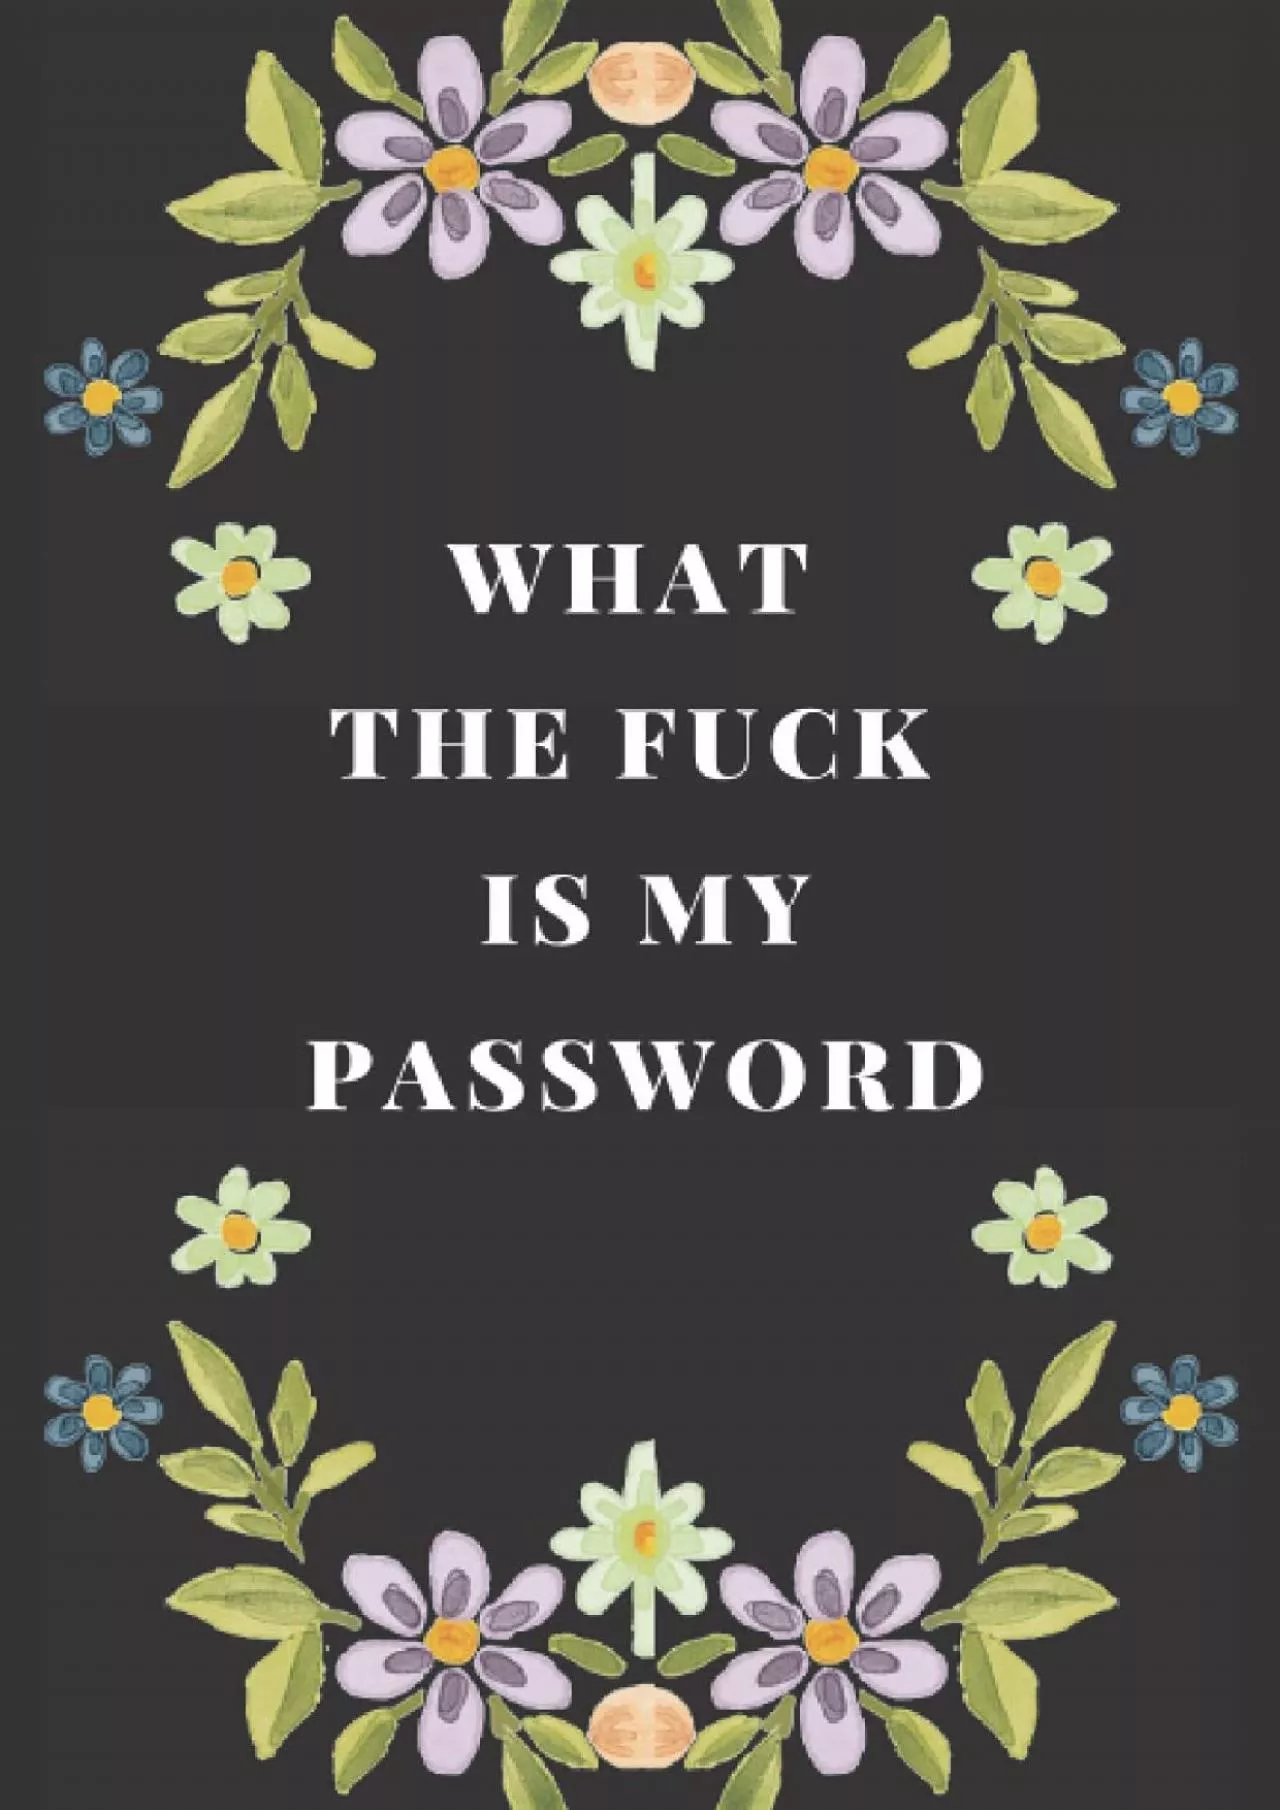 [READING BOOK]-What the fuck is my password: An Organizer for All Your Passwords and Shit,